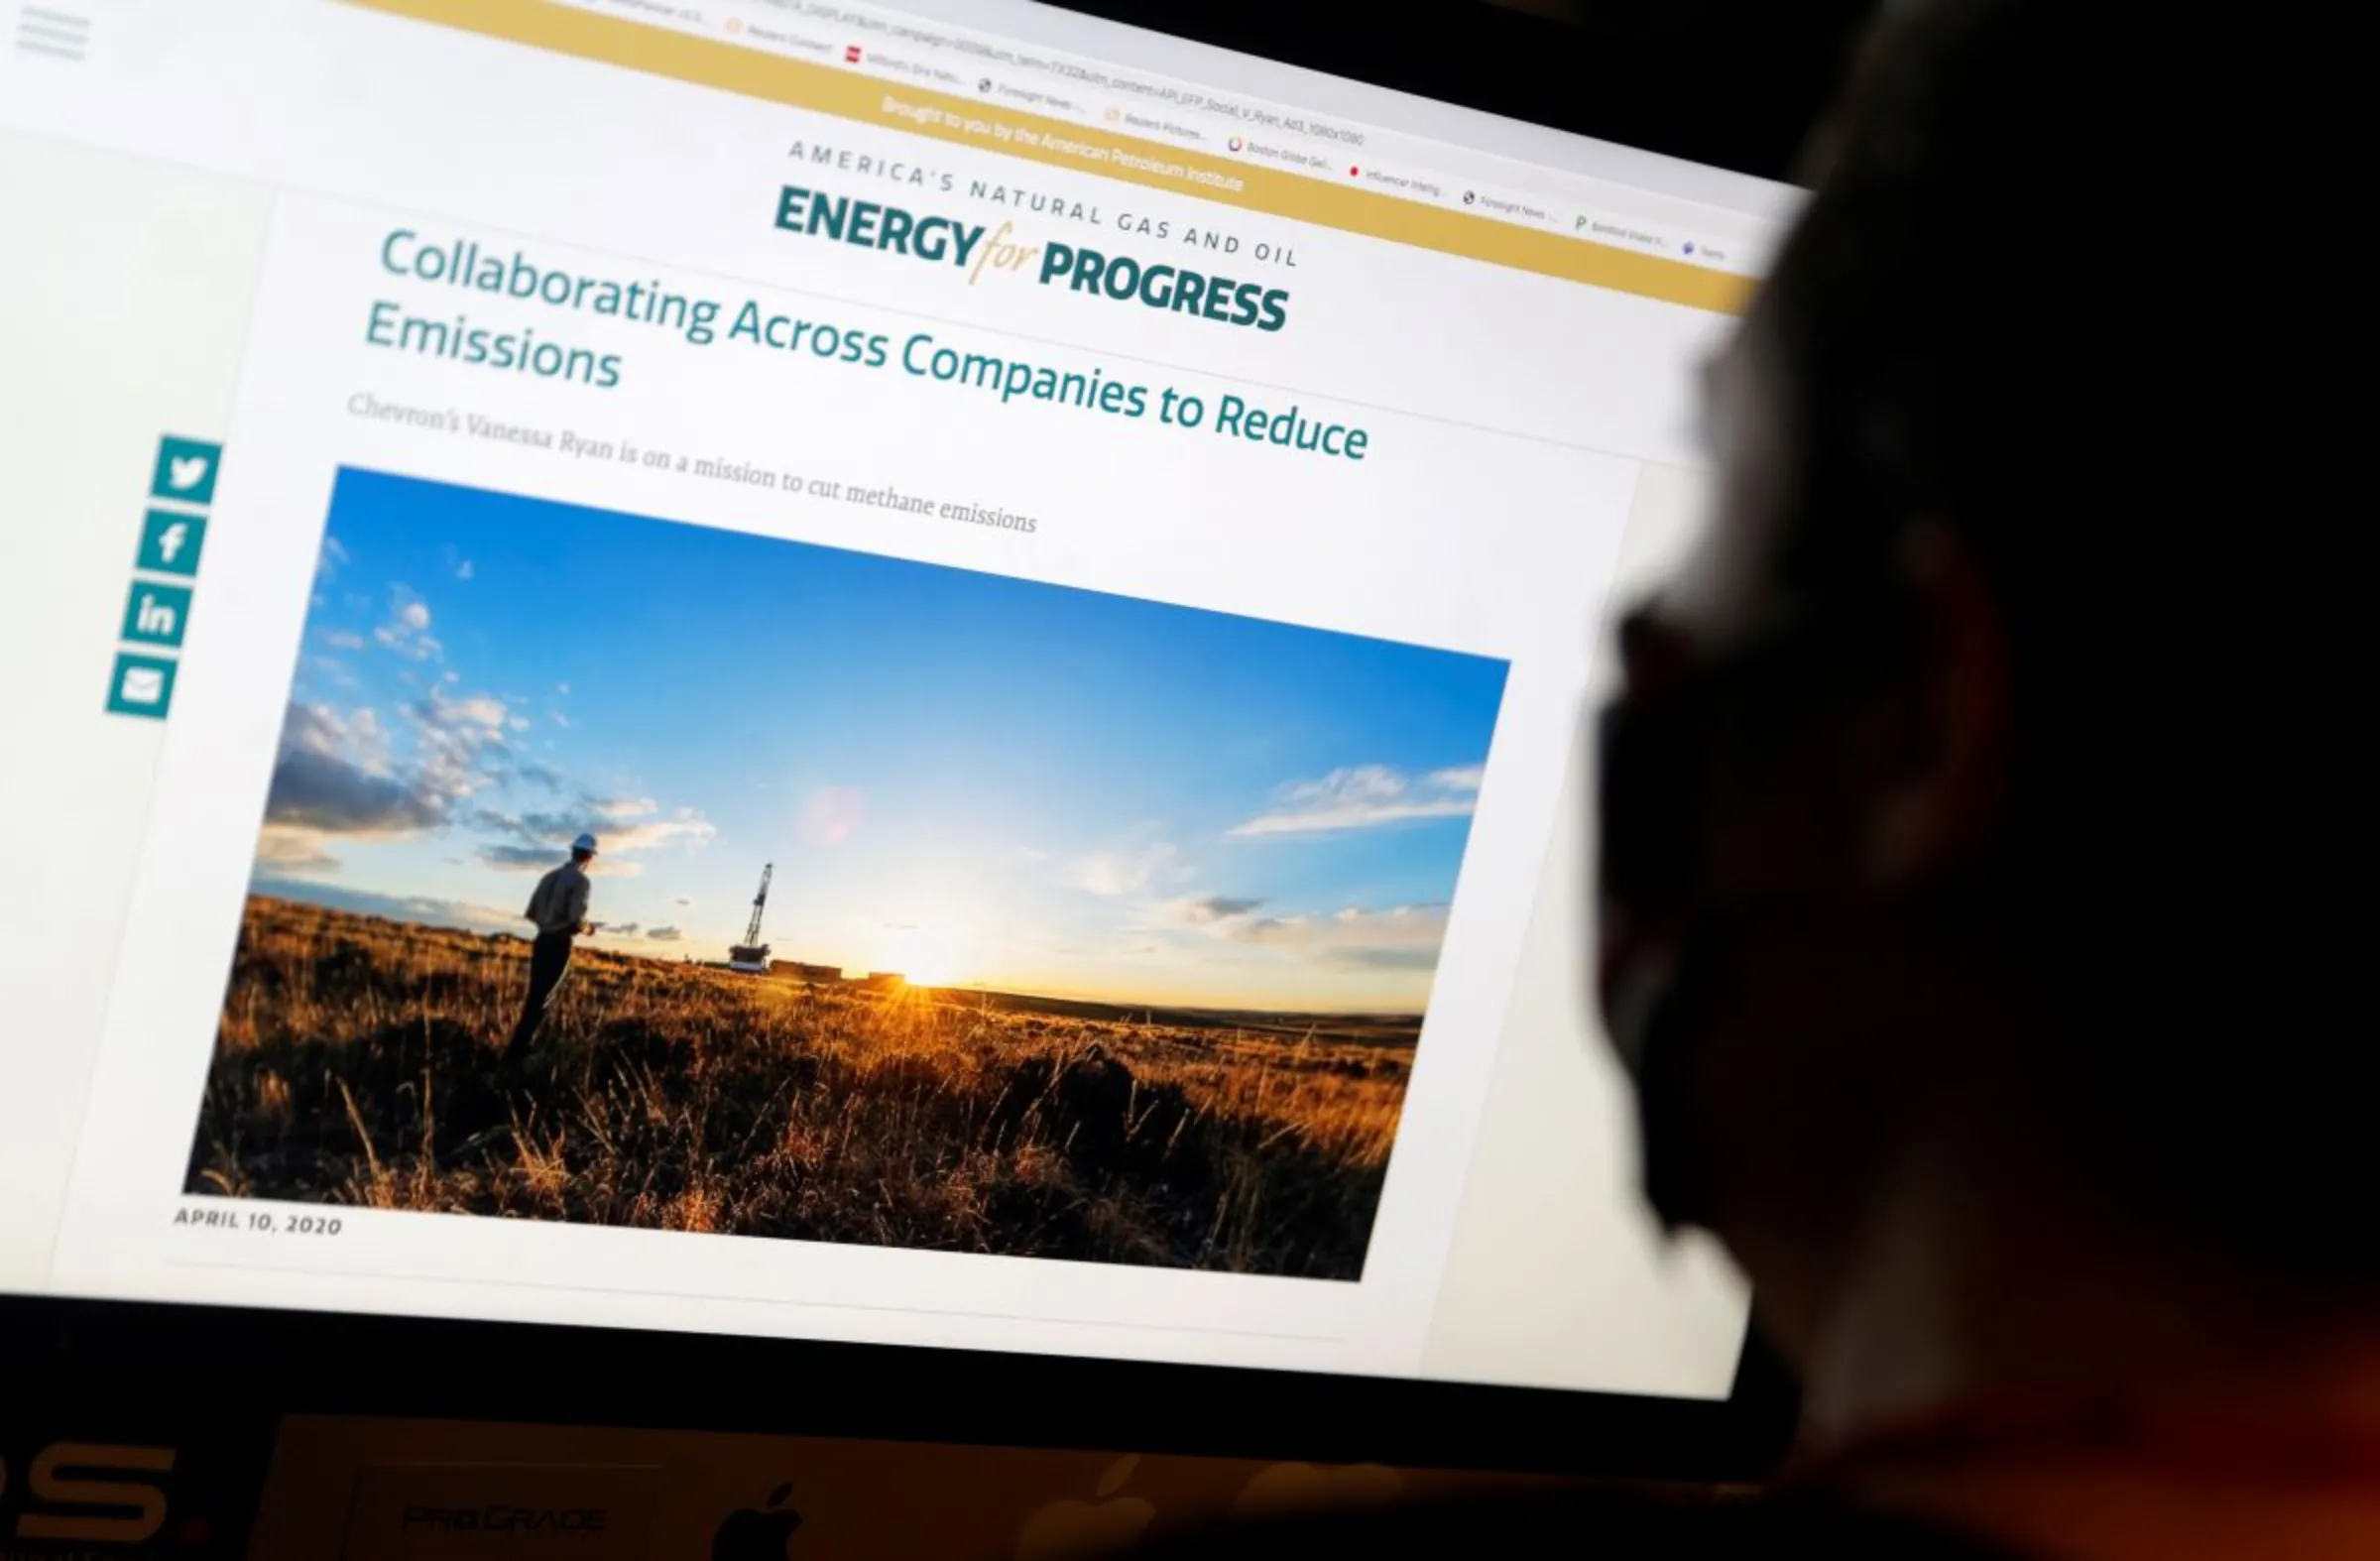 A person views an online advertisement that ran on Facebook and was paid for by the American Petroleum Institute as part of their Energy For Progress campaign to cast natural gas as climate-friendly, in this illustration picture taken August 6, 2020. Picture taken August 6, 2020. REUTERS/Mike Segar/Illustration